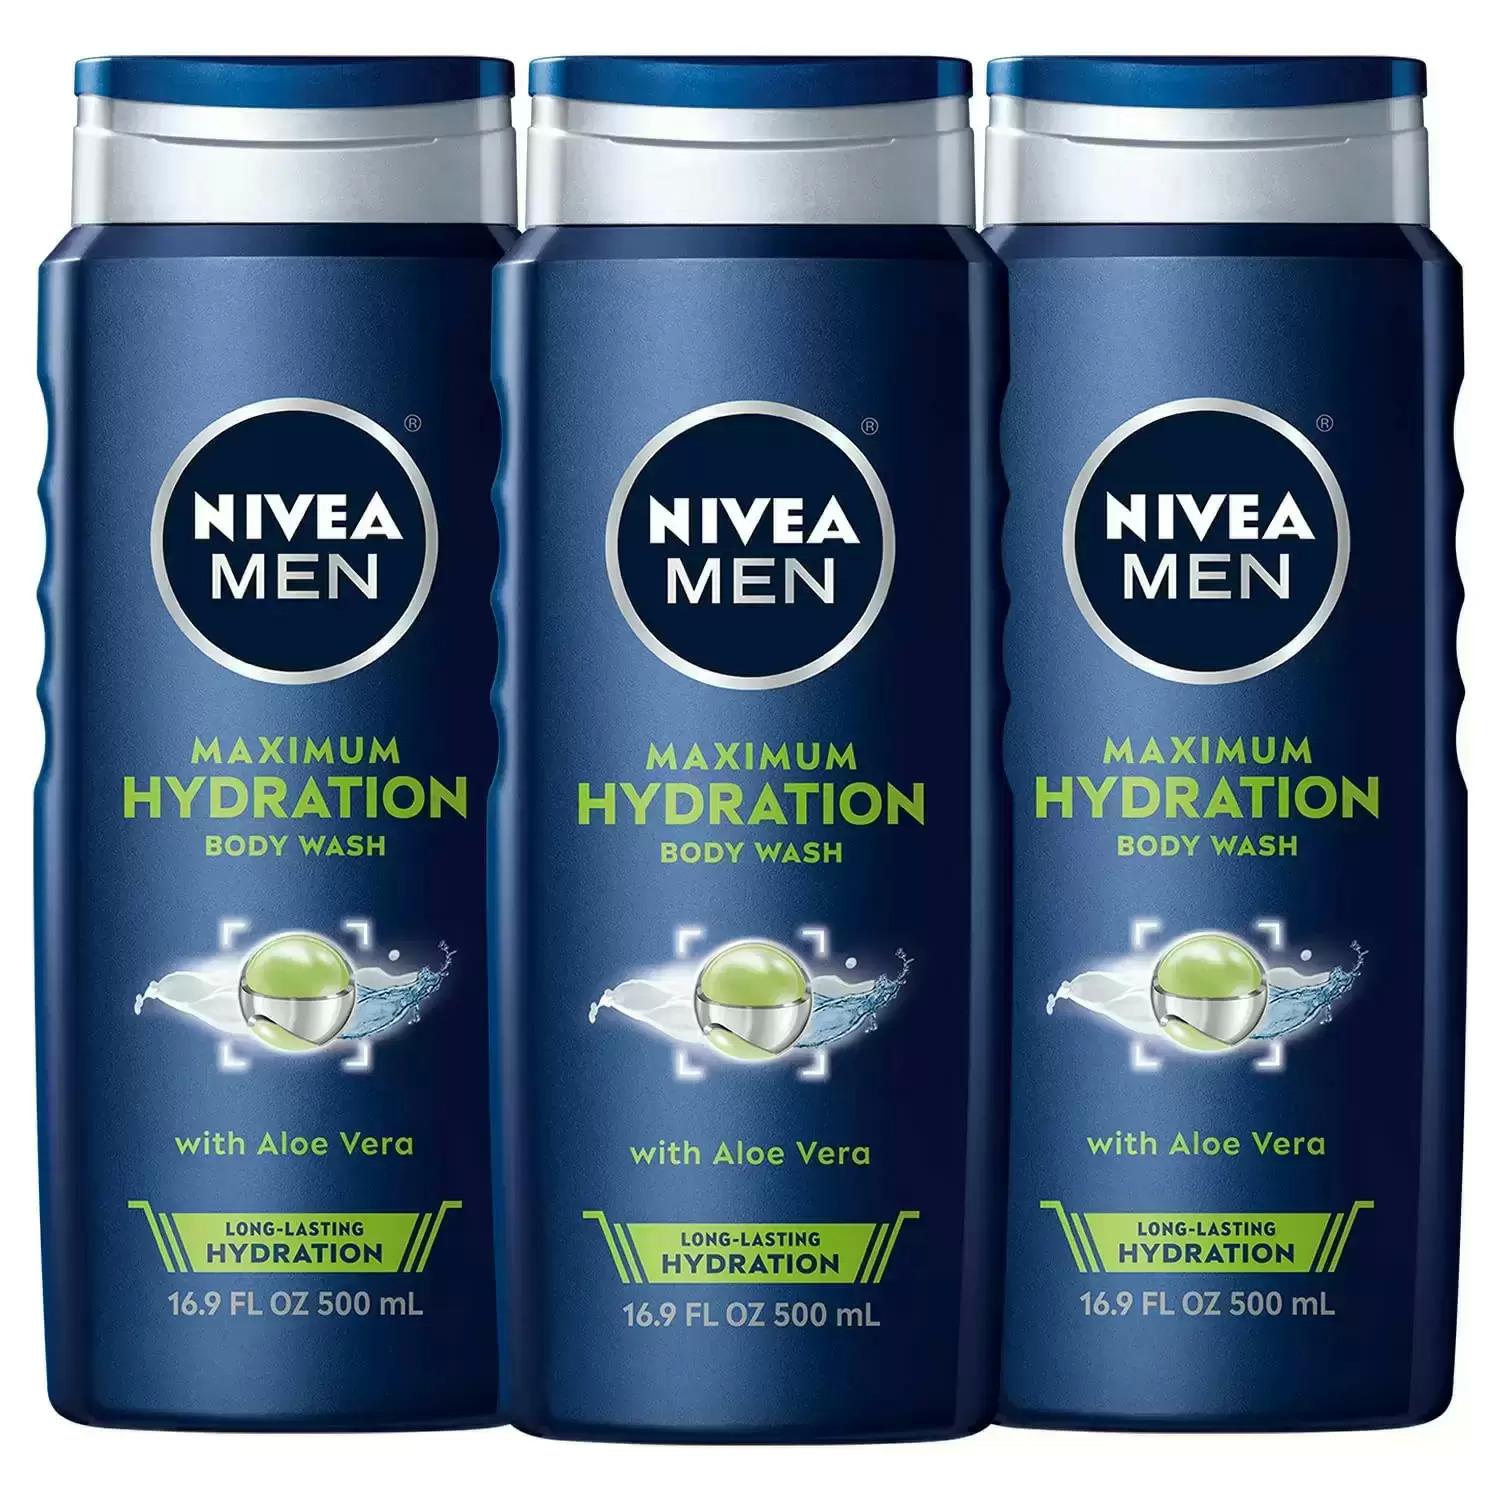 Nivea Men 3-in1 Maximum Hydration with Aloe Vera Body Wash 3 Pack for $9 Shipped